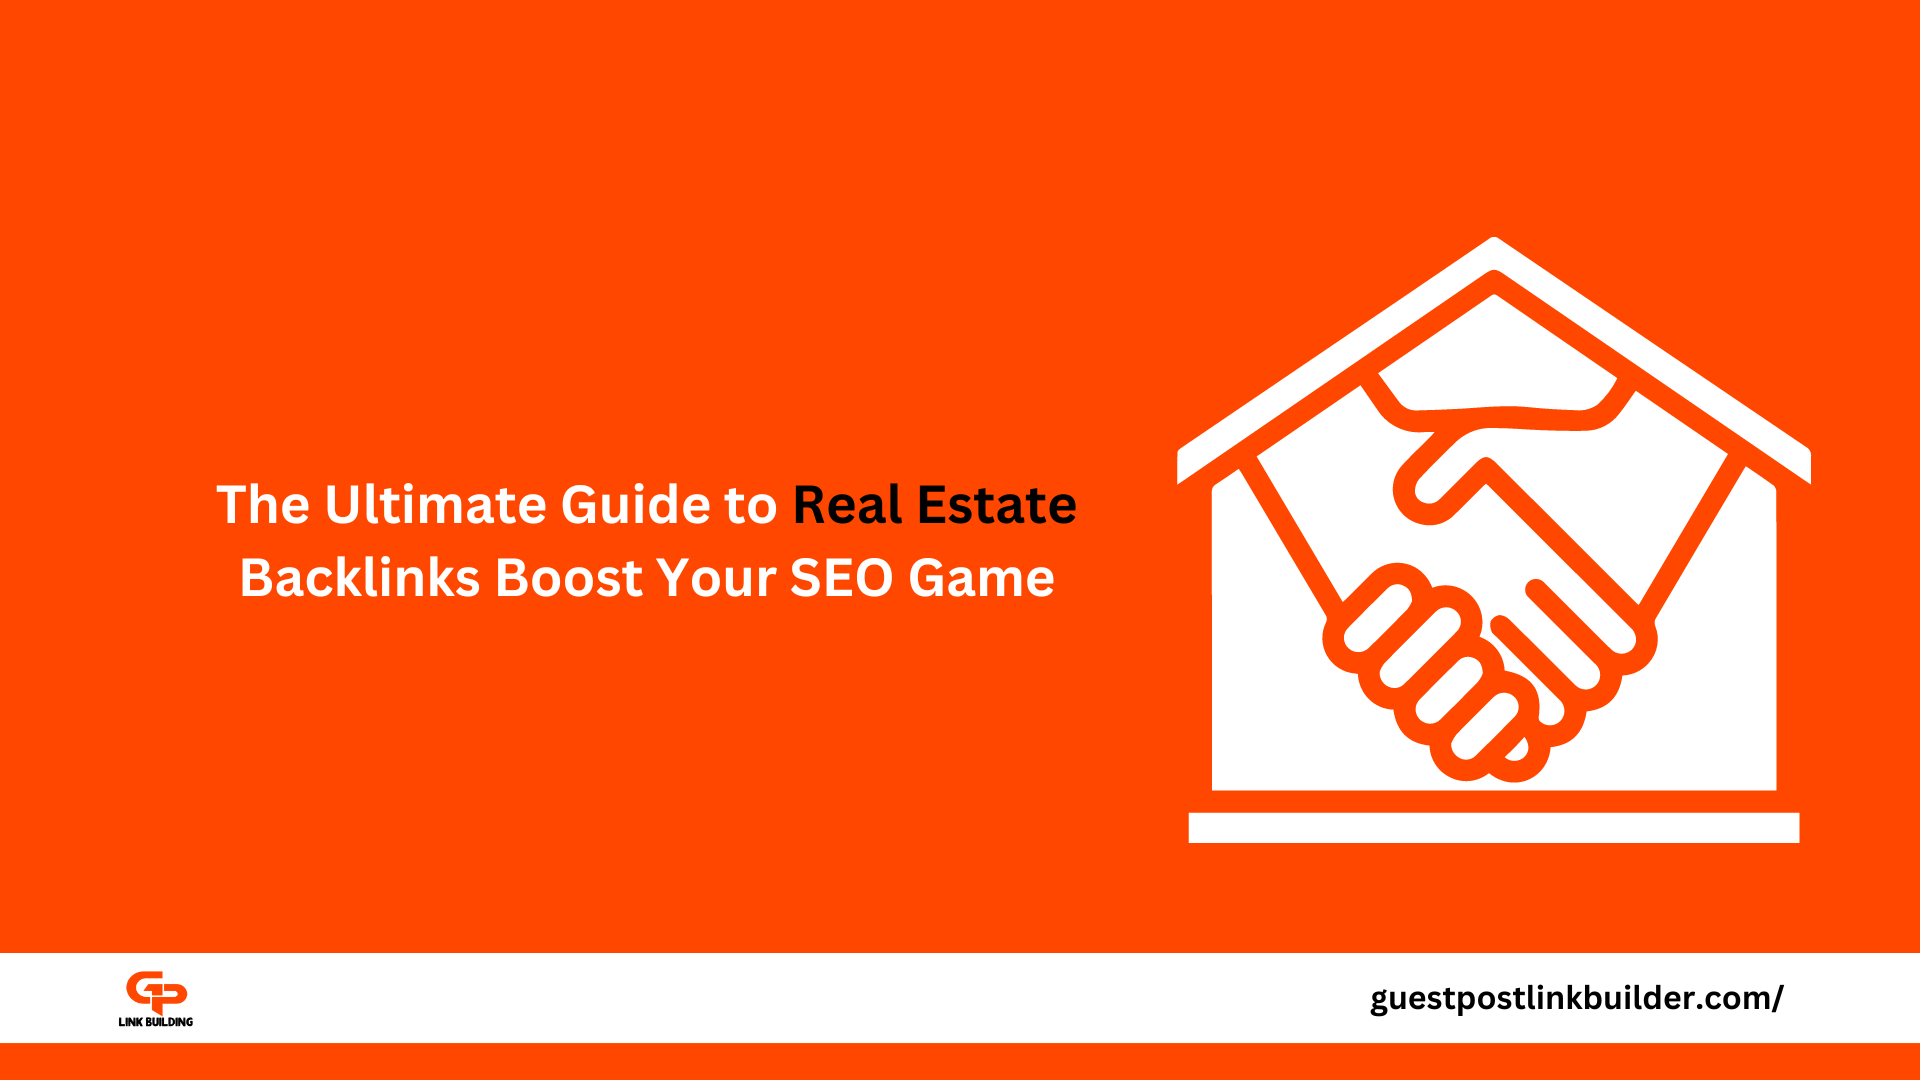 The Ultimate Guide to Real Estate Backlinks Boost Your SEO Game